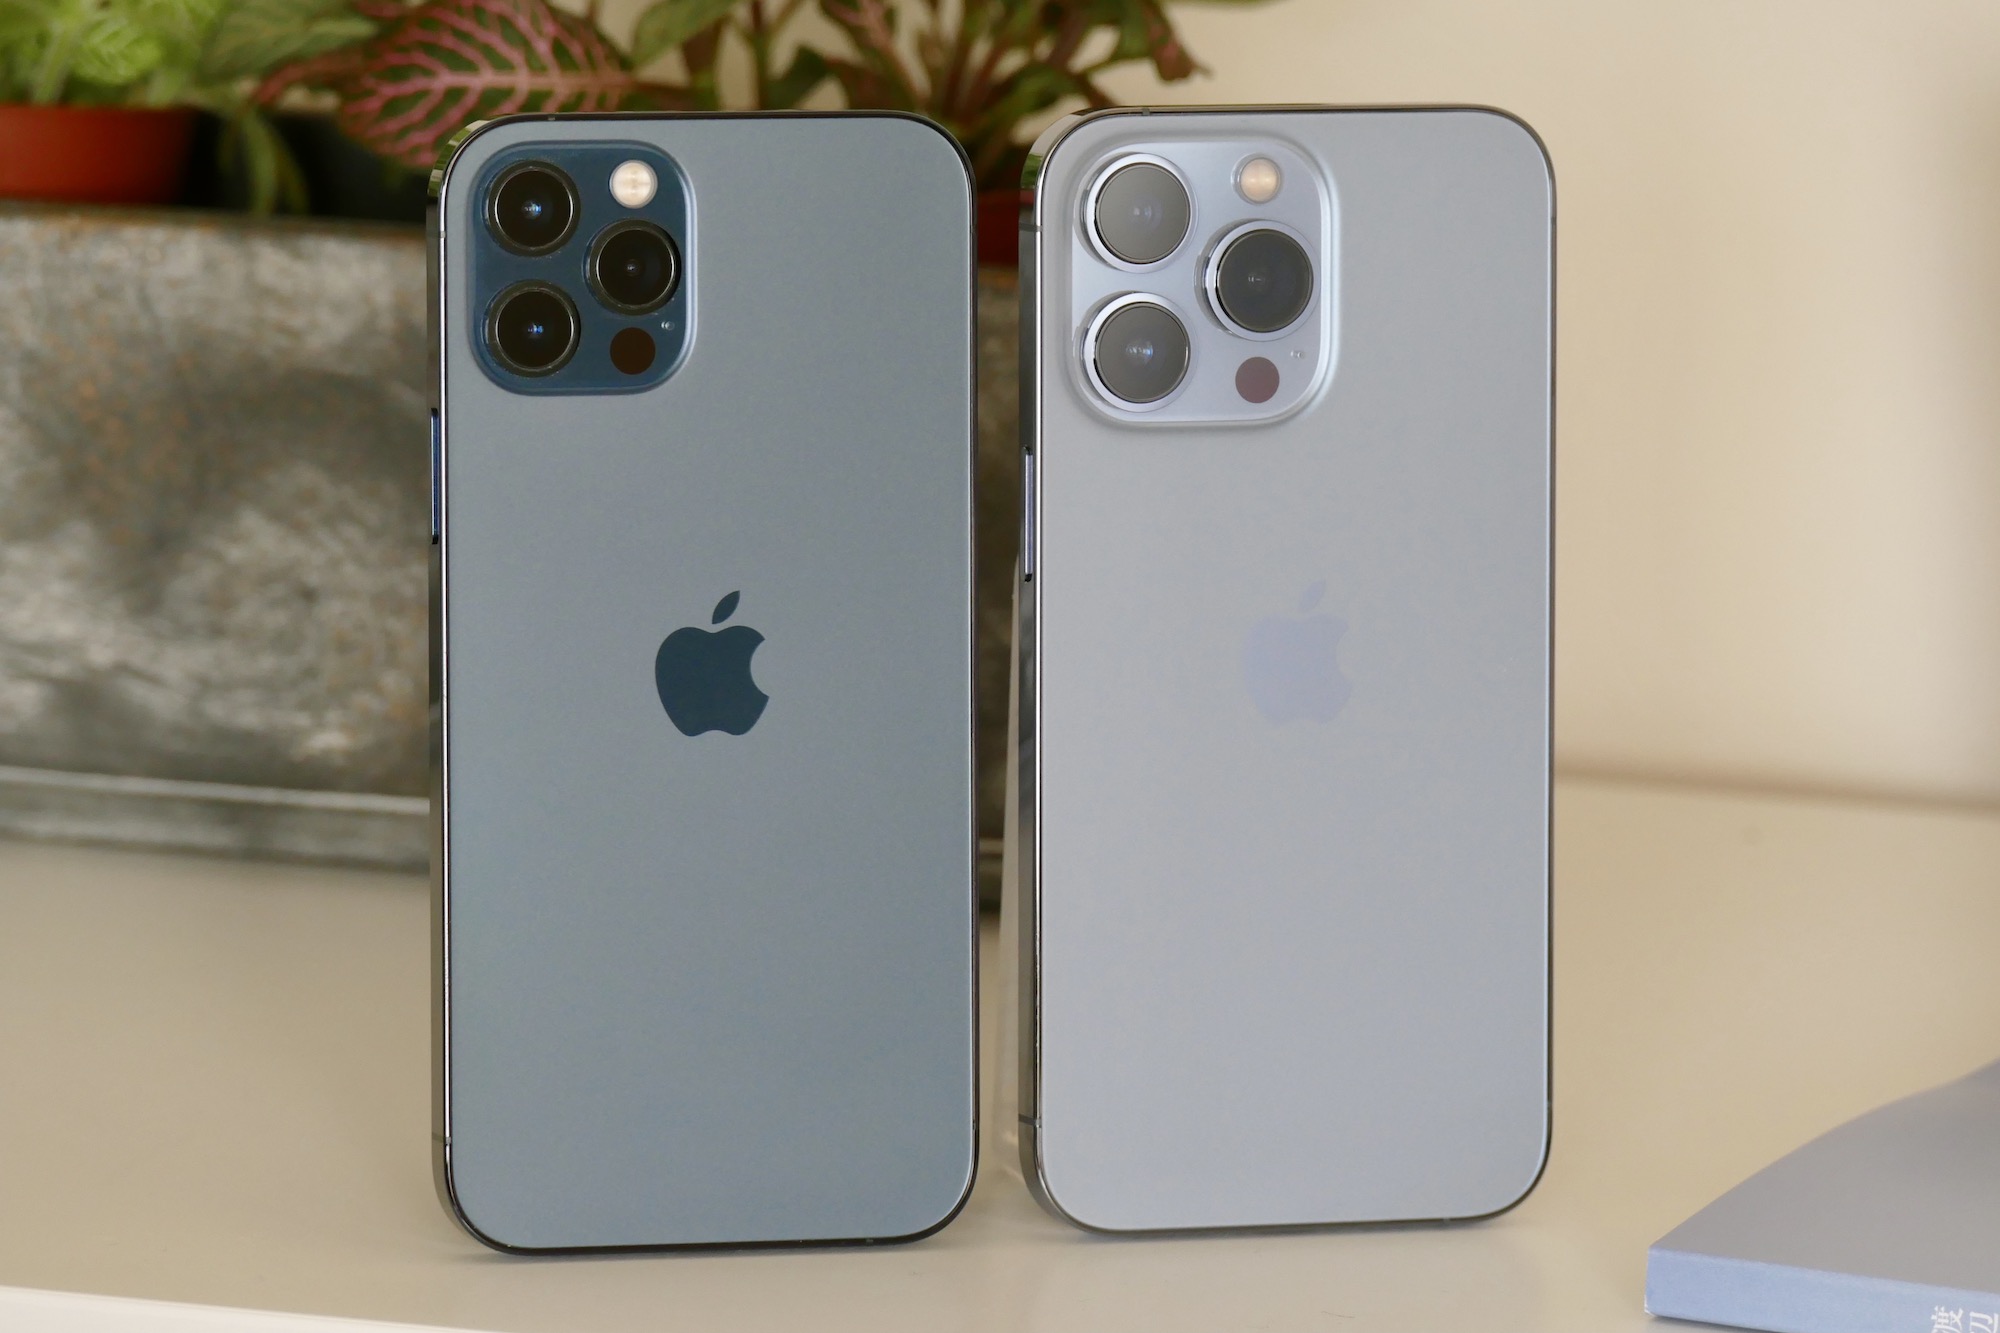 The iPhone 12 Pro and iPhone 13 Pro.